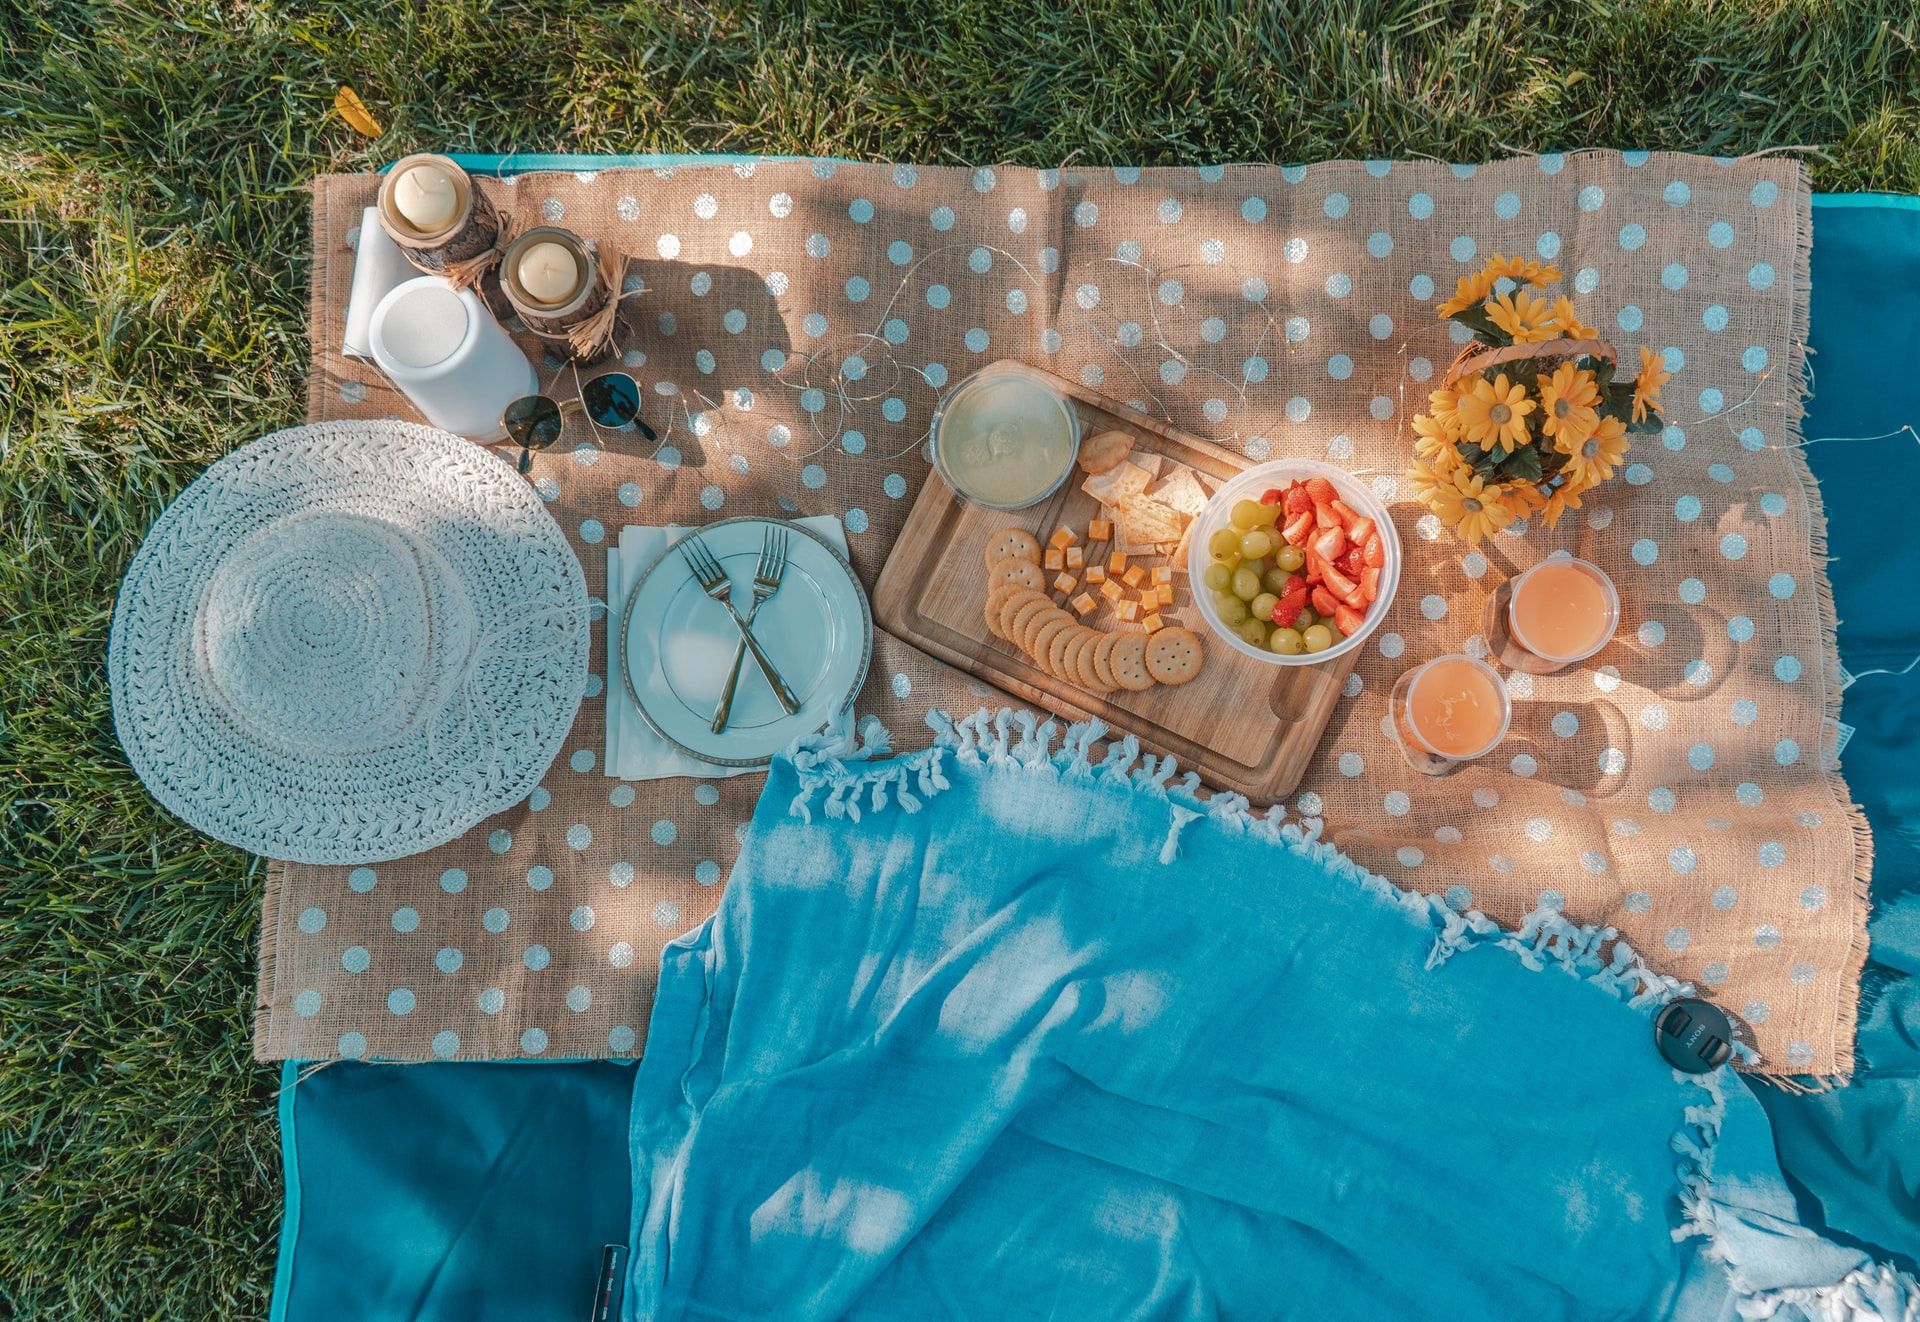 plates and food set out on a picnic blanket